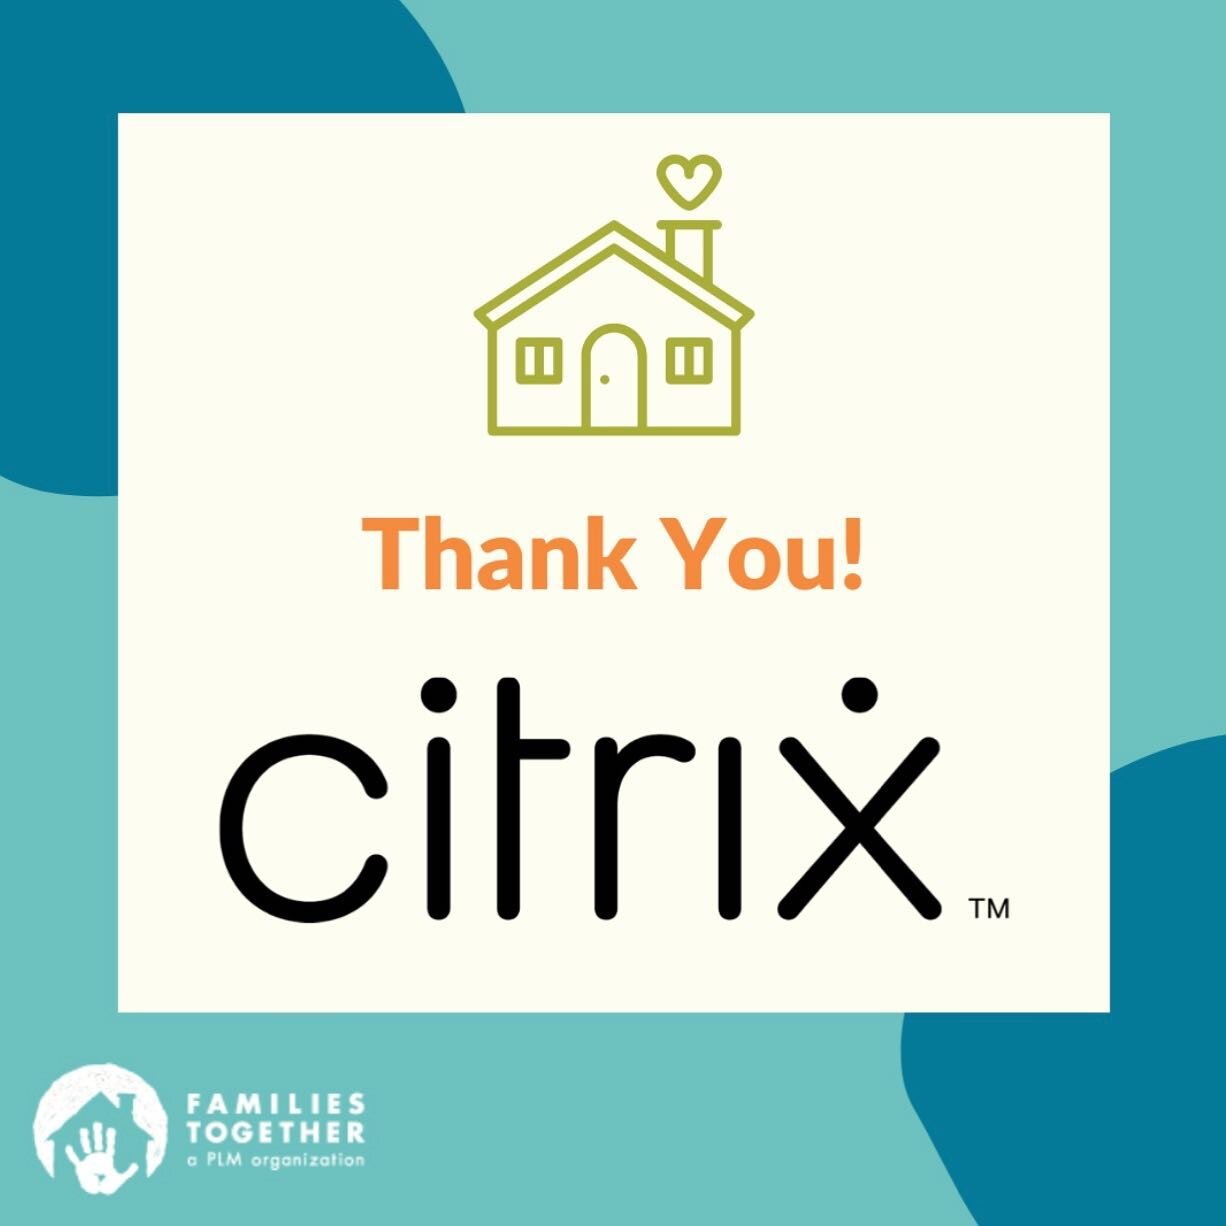 Thank you for supporting Families Together! @citrix